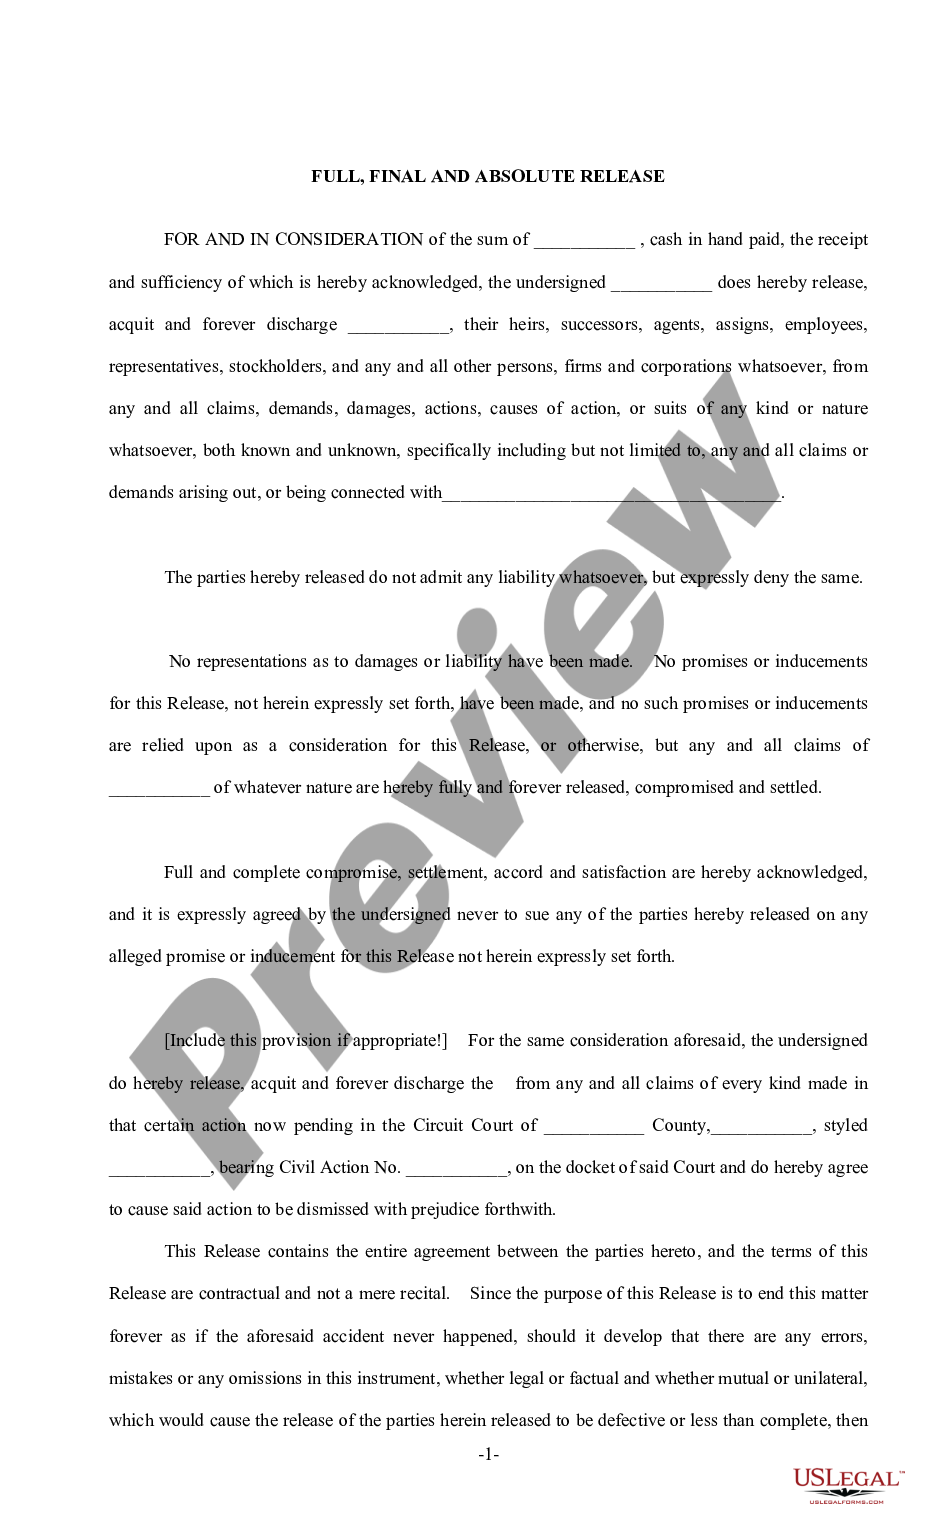 page 0 Settlement Agreement and Release of Claims - Breach of Contract - General Form preview